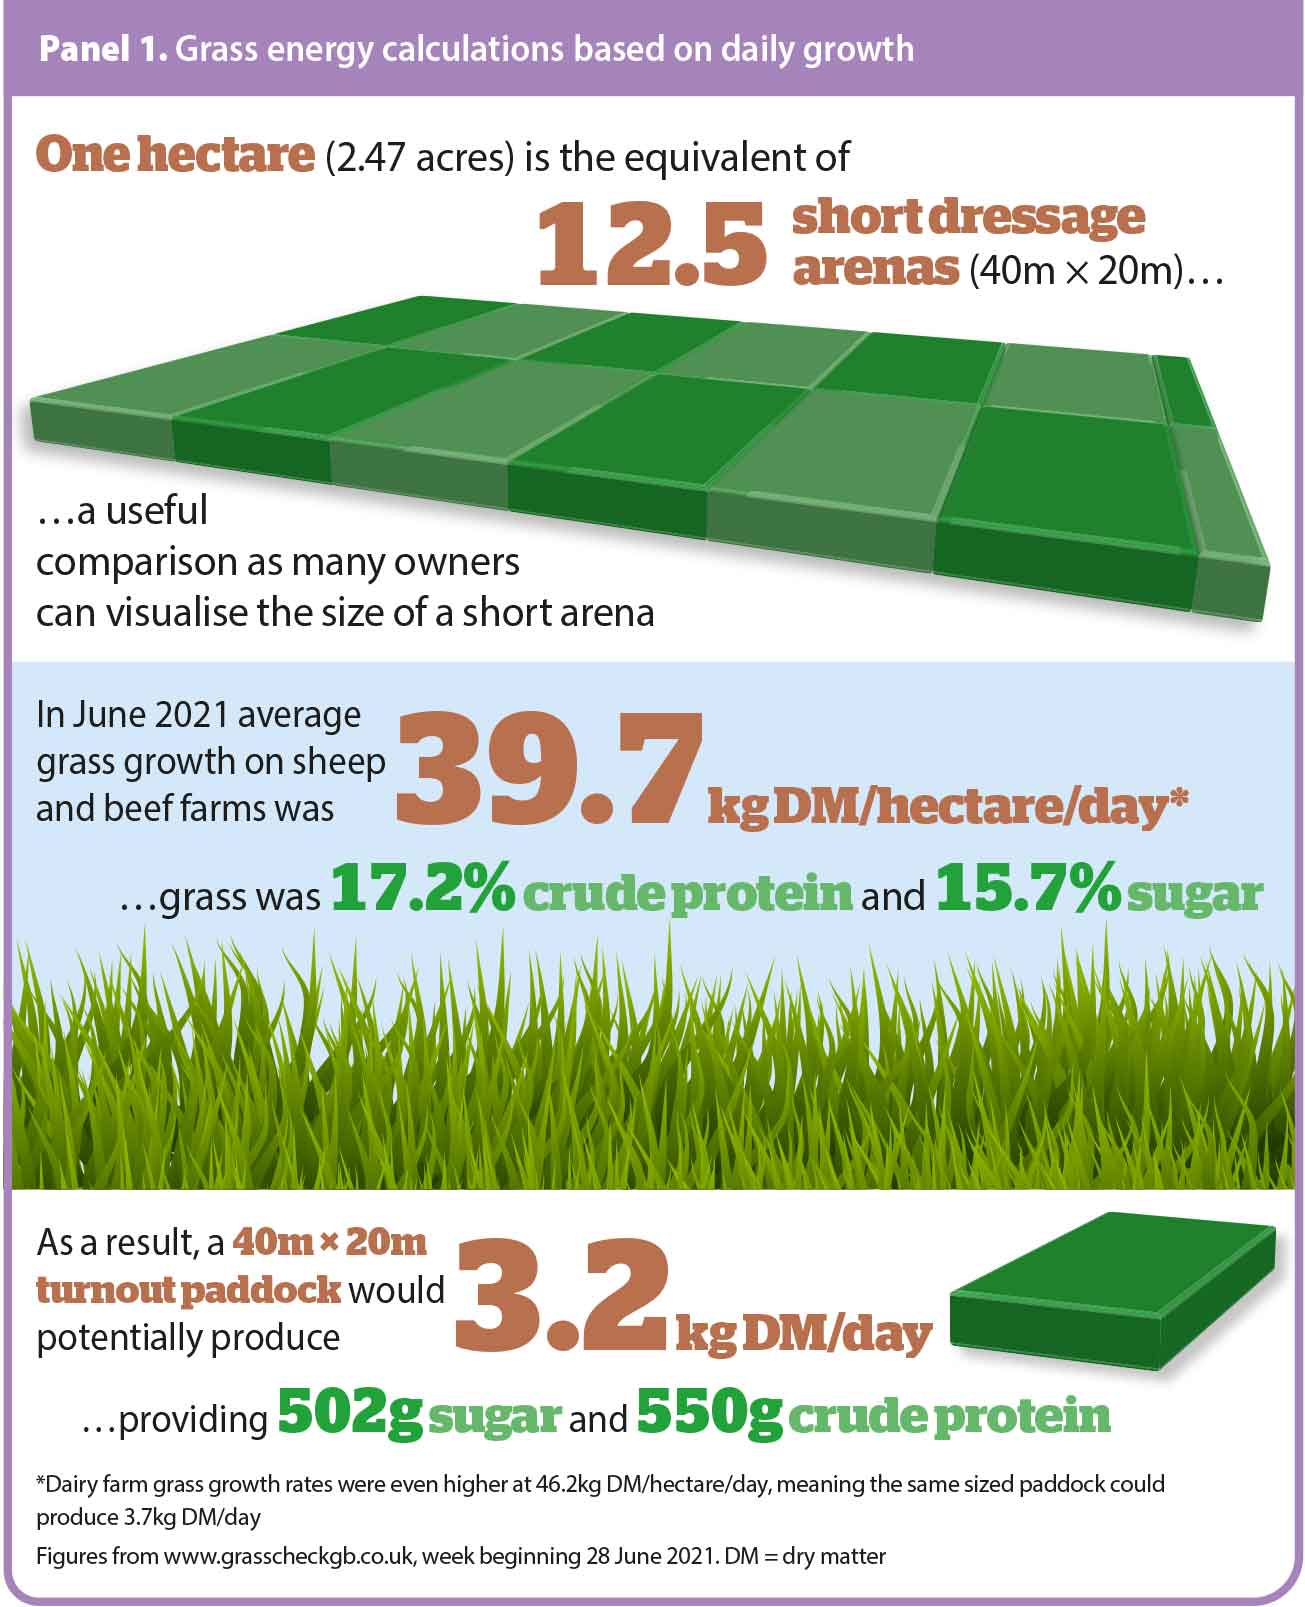 Panel 1. Grass energy calculations based on daily growth